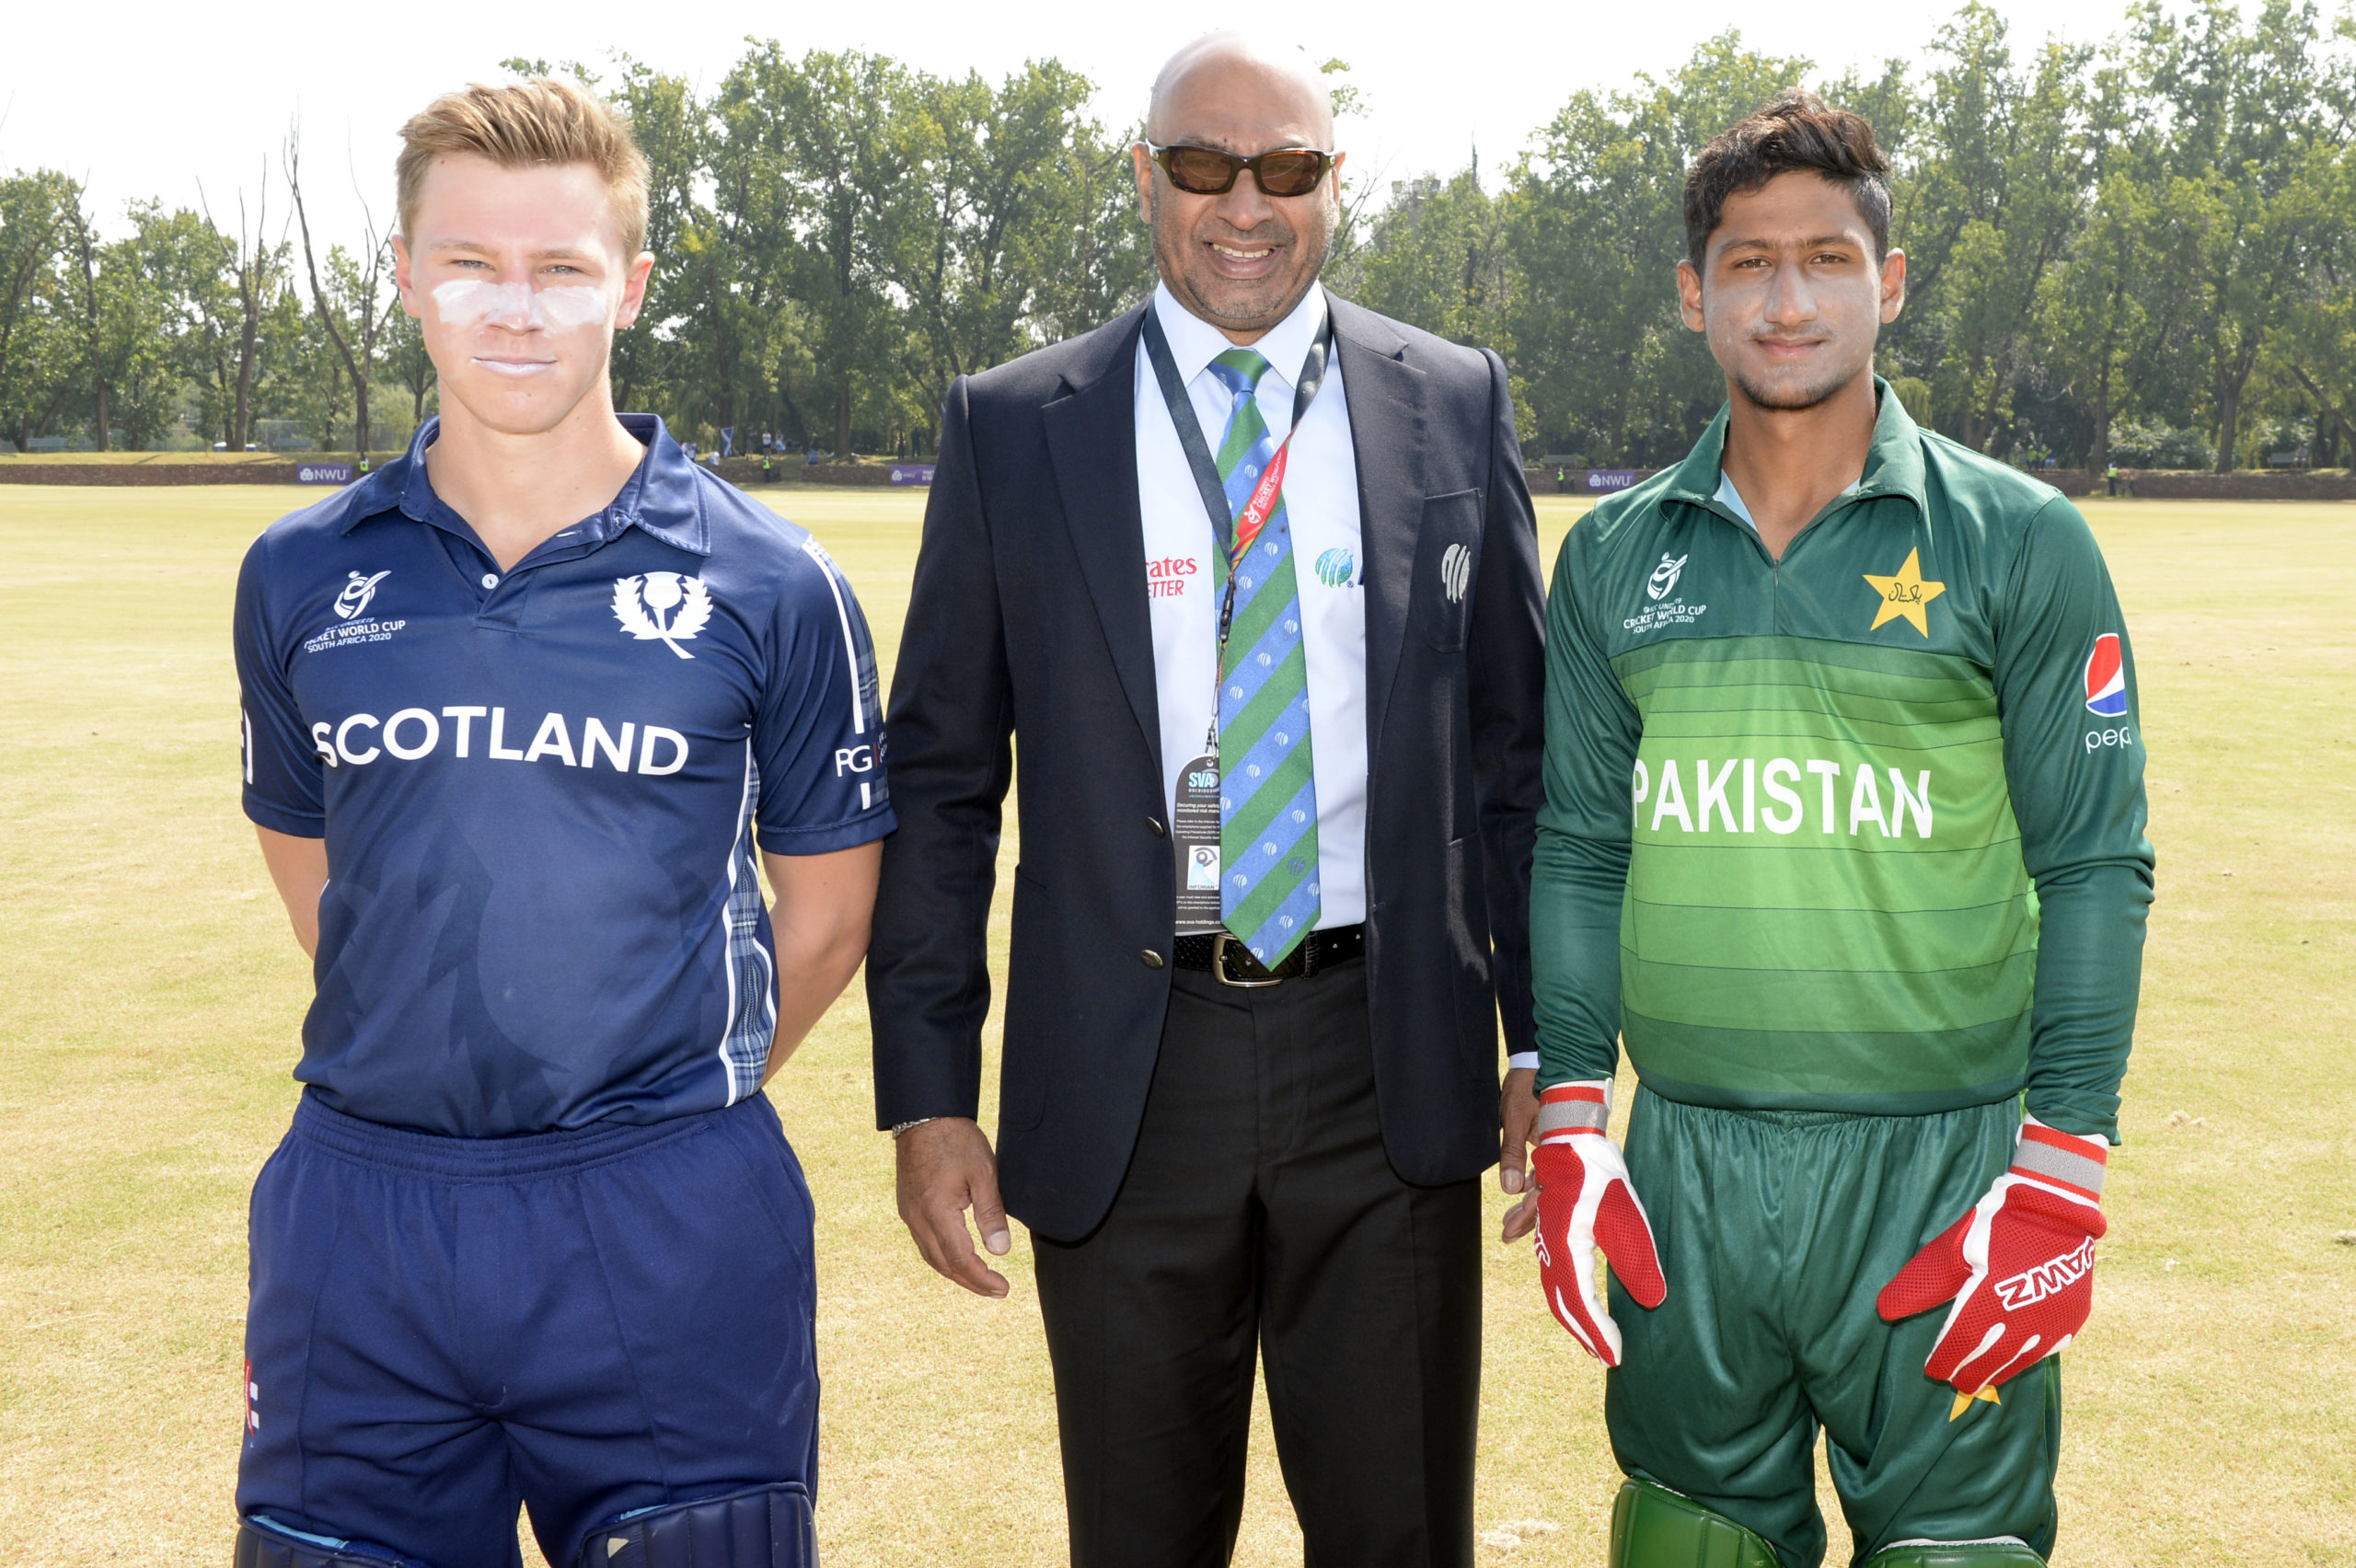 Pakistan beat Scotland by 7 wickets in opening Cricket World Cup fixture